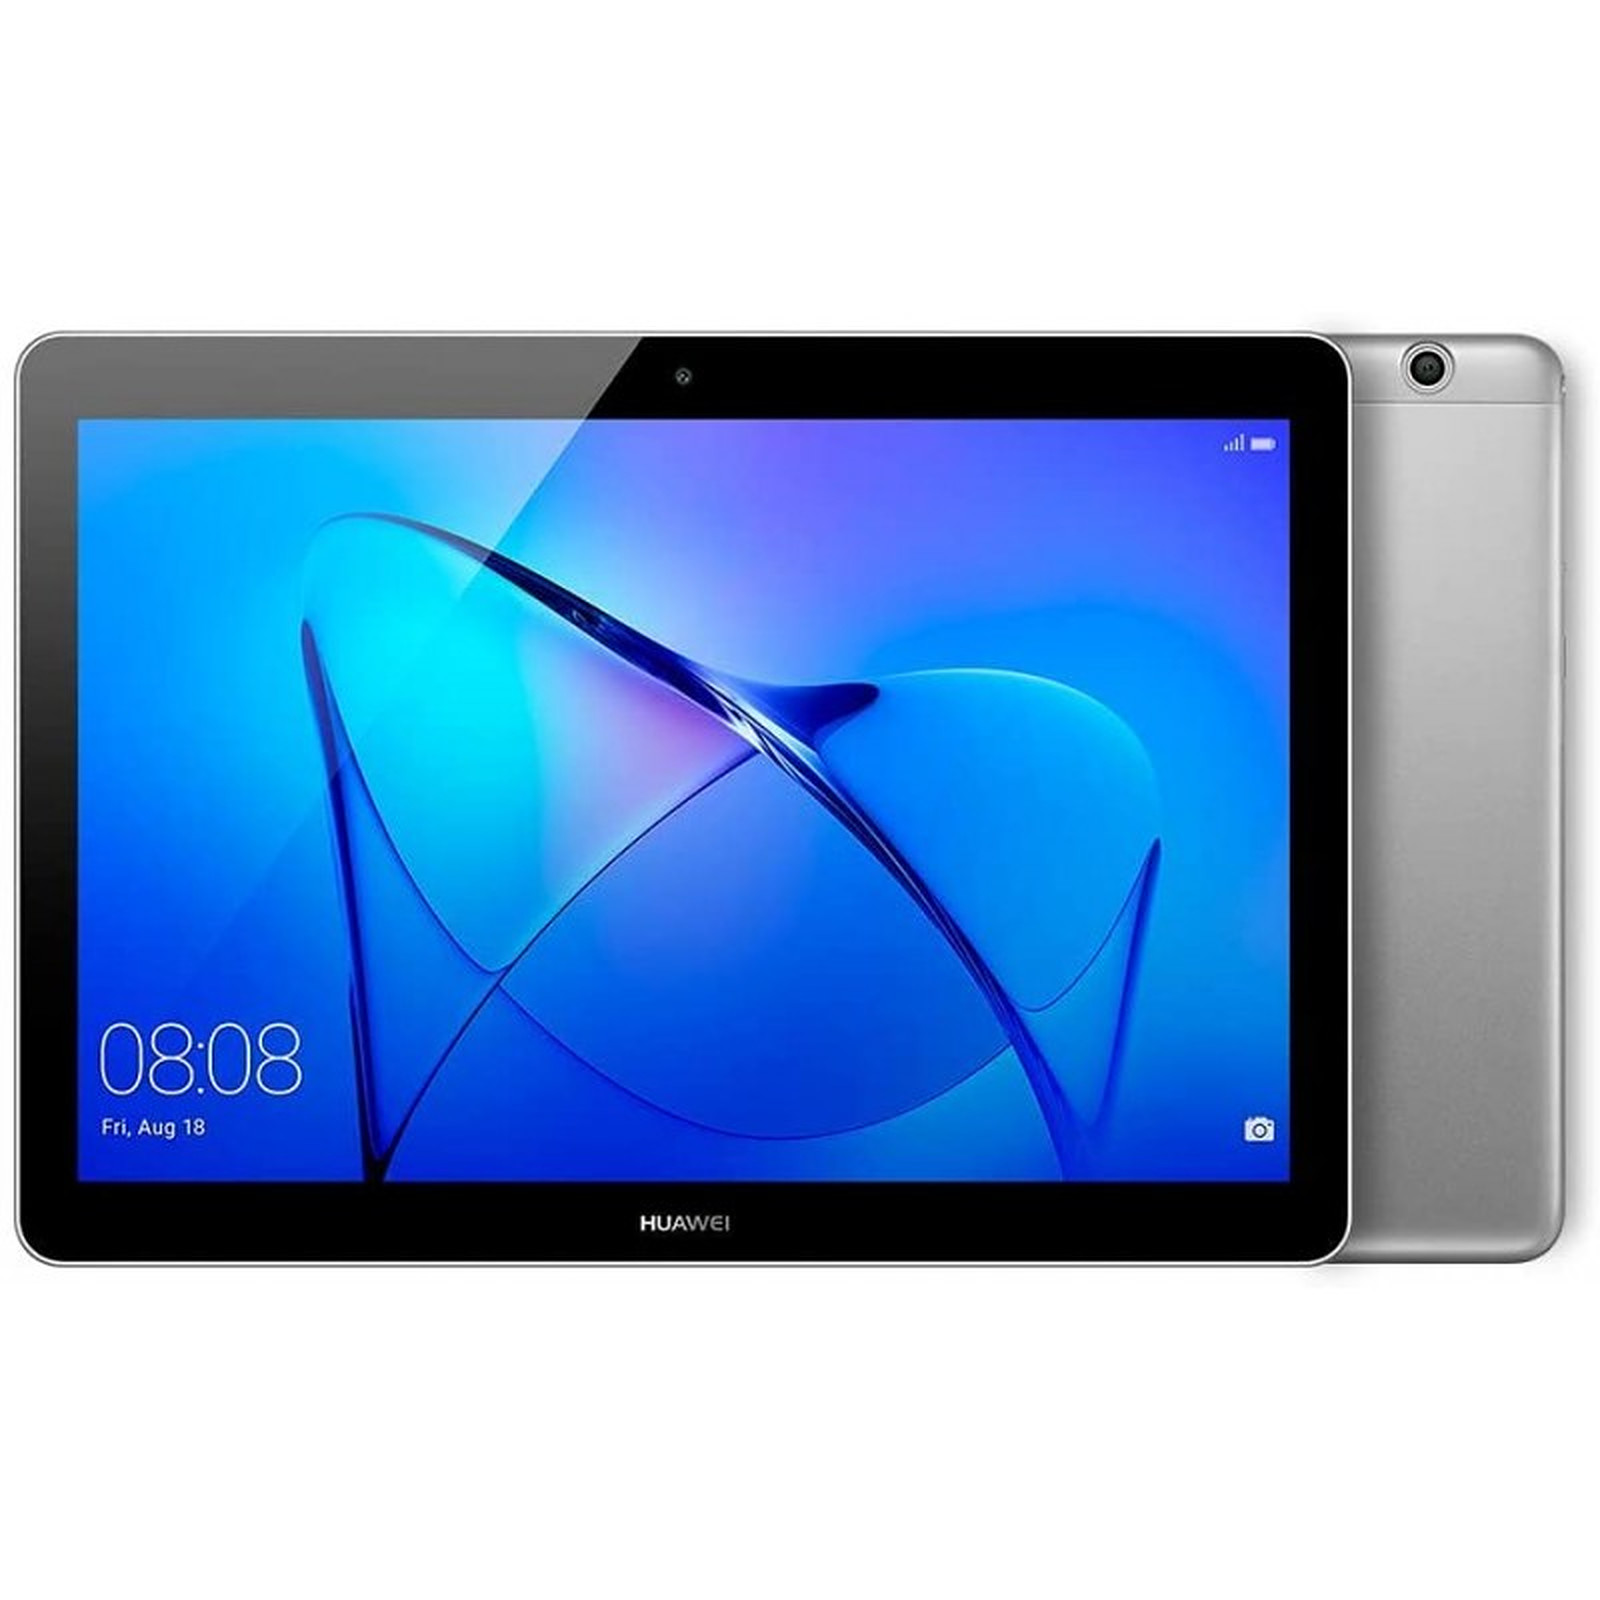 Huawei MediaPad T3 10 (AGS-W09-B-6573) (AGS-W09-B) · Reconditionne - Tablette tactile Huawei